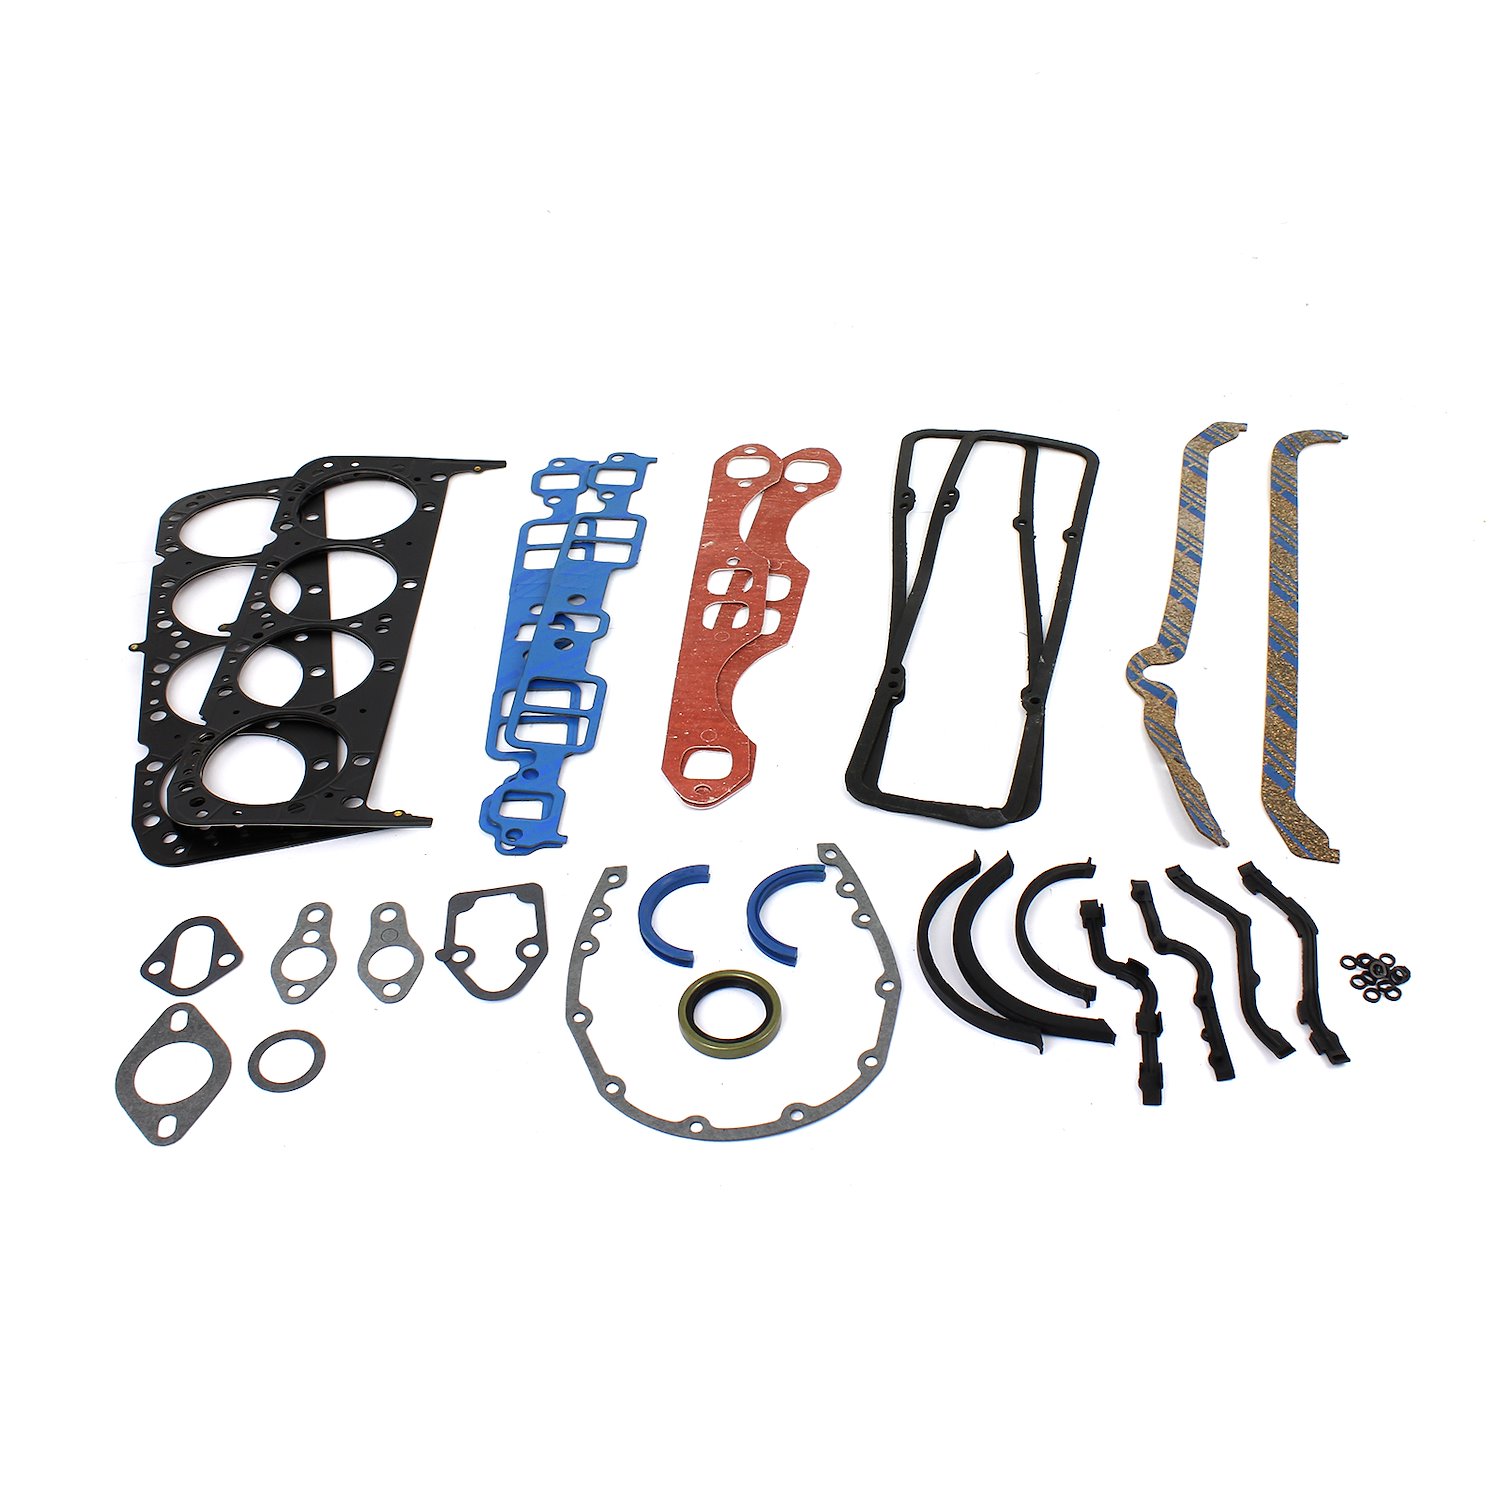 Full Engine Gasket Set for 1955-1979 Small Block Chevy 350 [Multi-Layer Steel Head Gaskets]